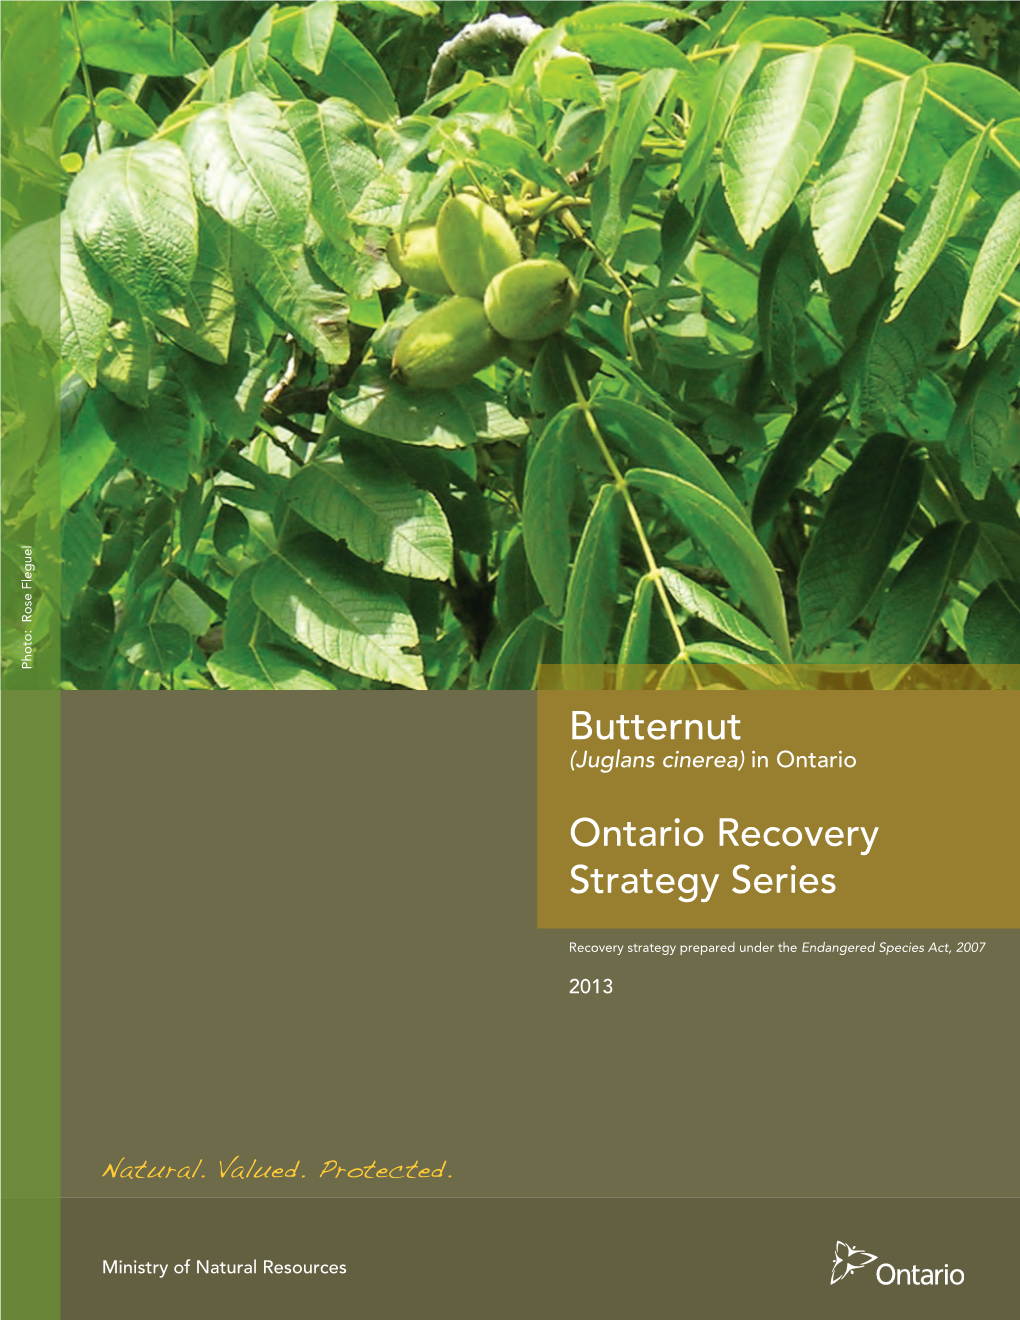 Recovery Strategy for the Butternut in Ontario